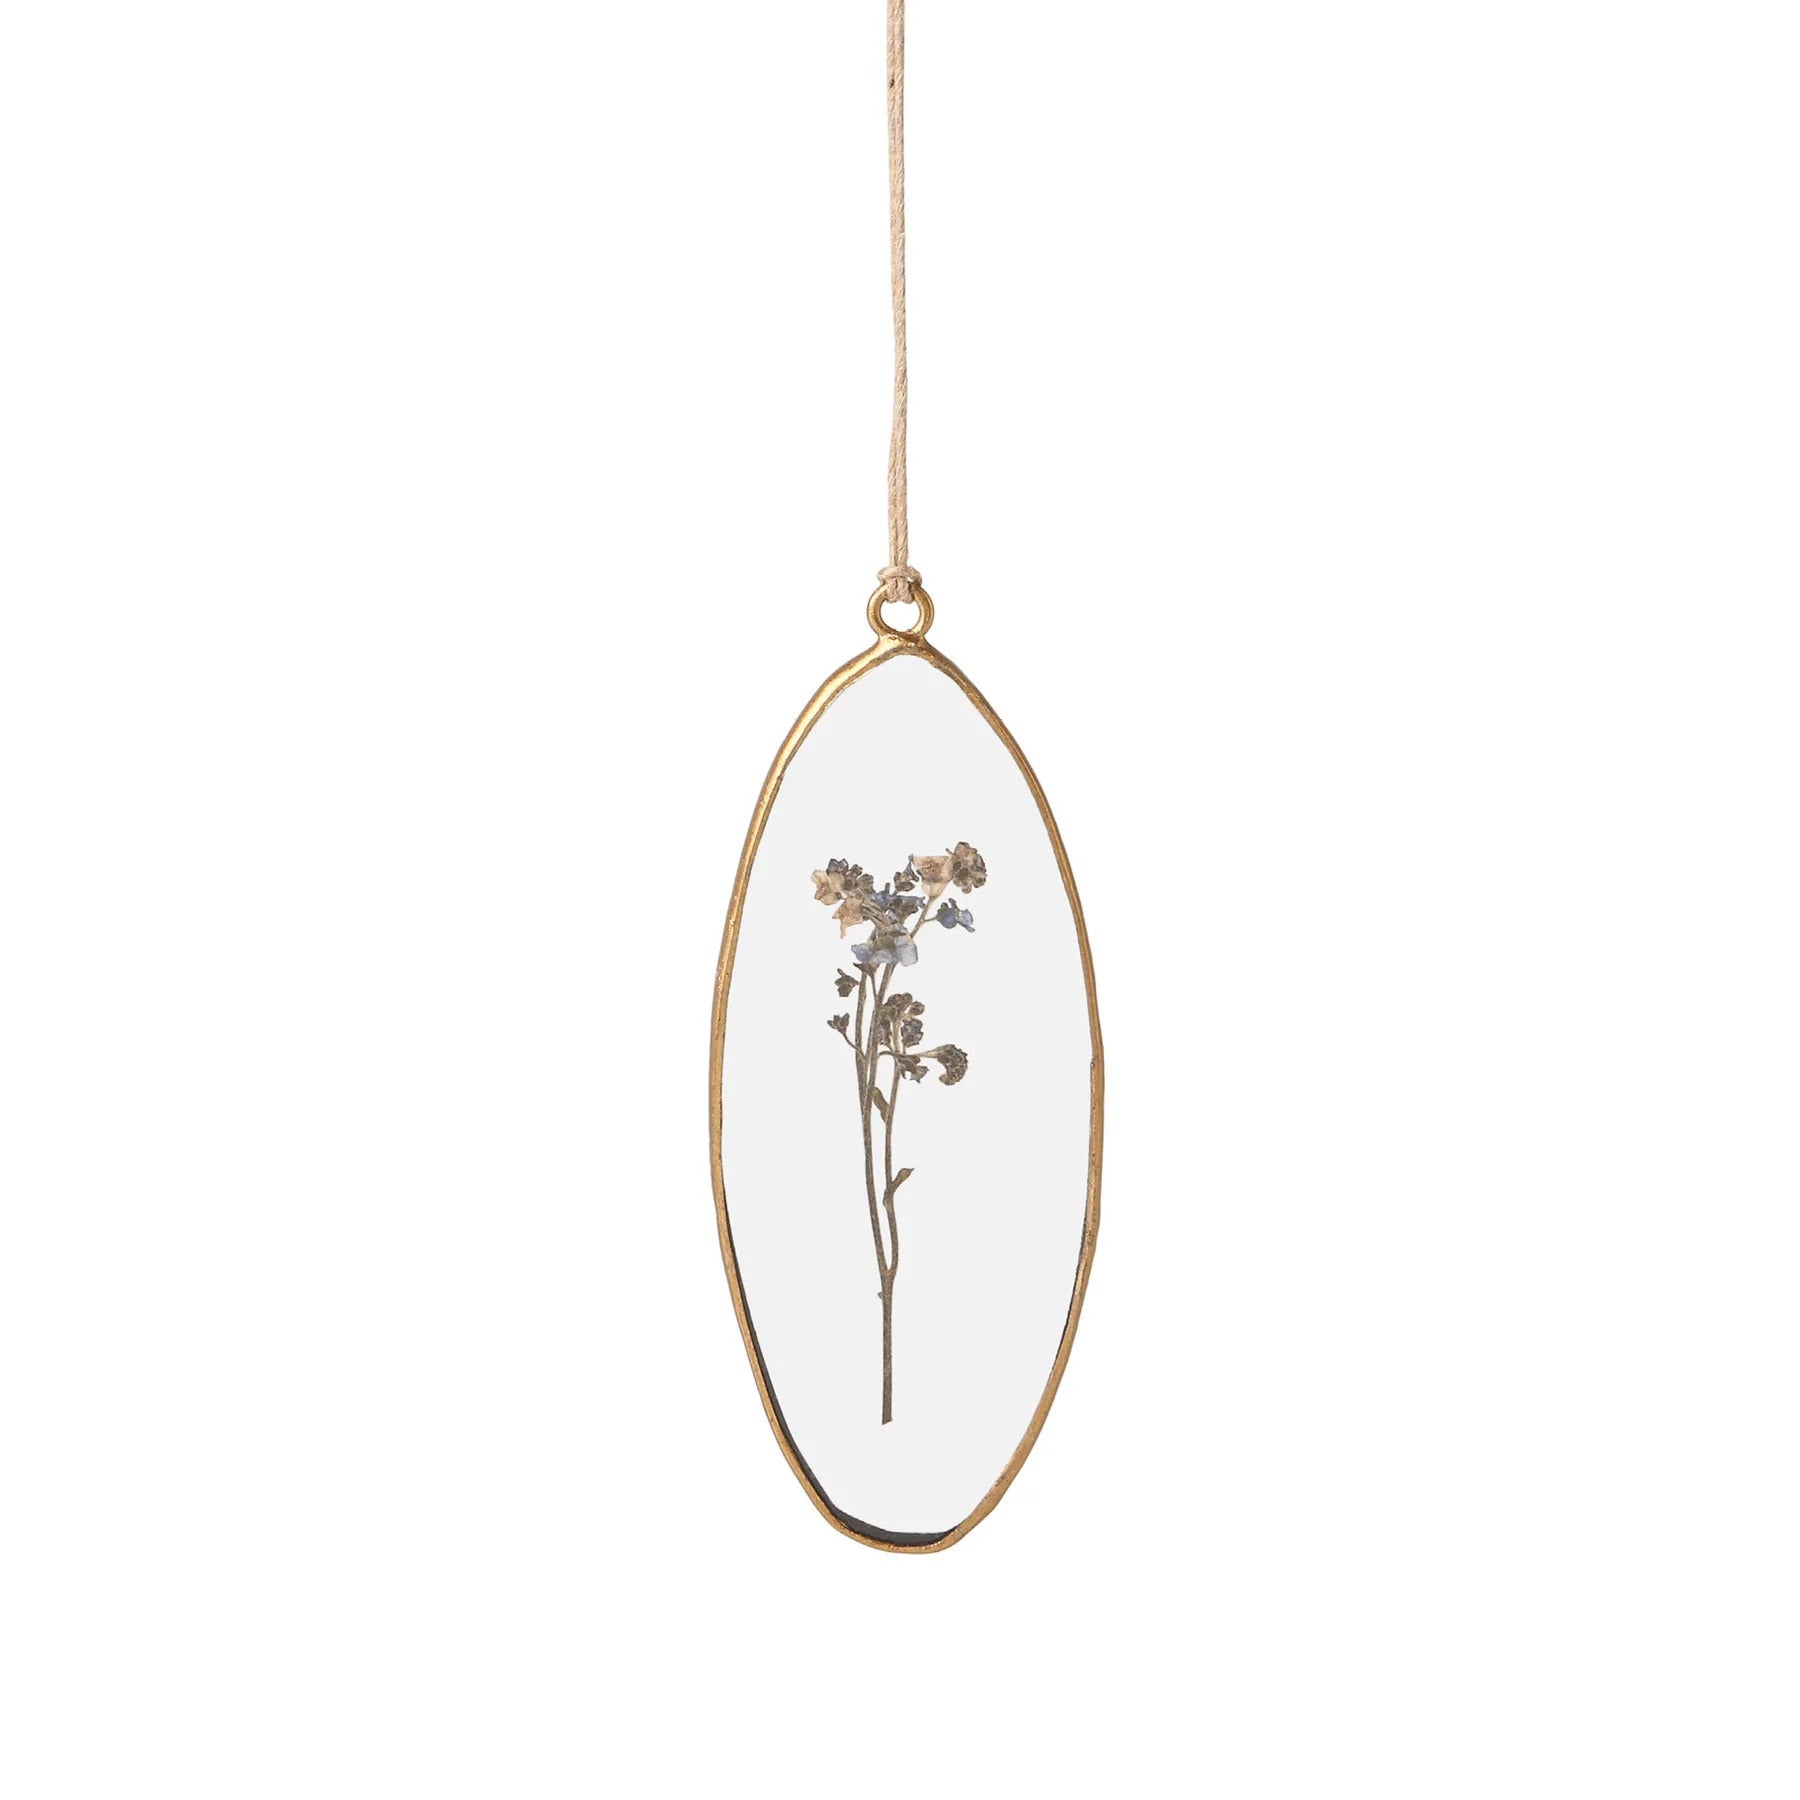 Rosy Rings Periwinkle Oval Pressed Floral Suncatcher